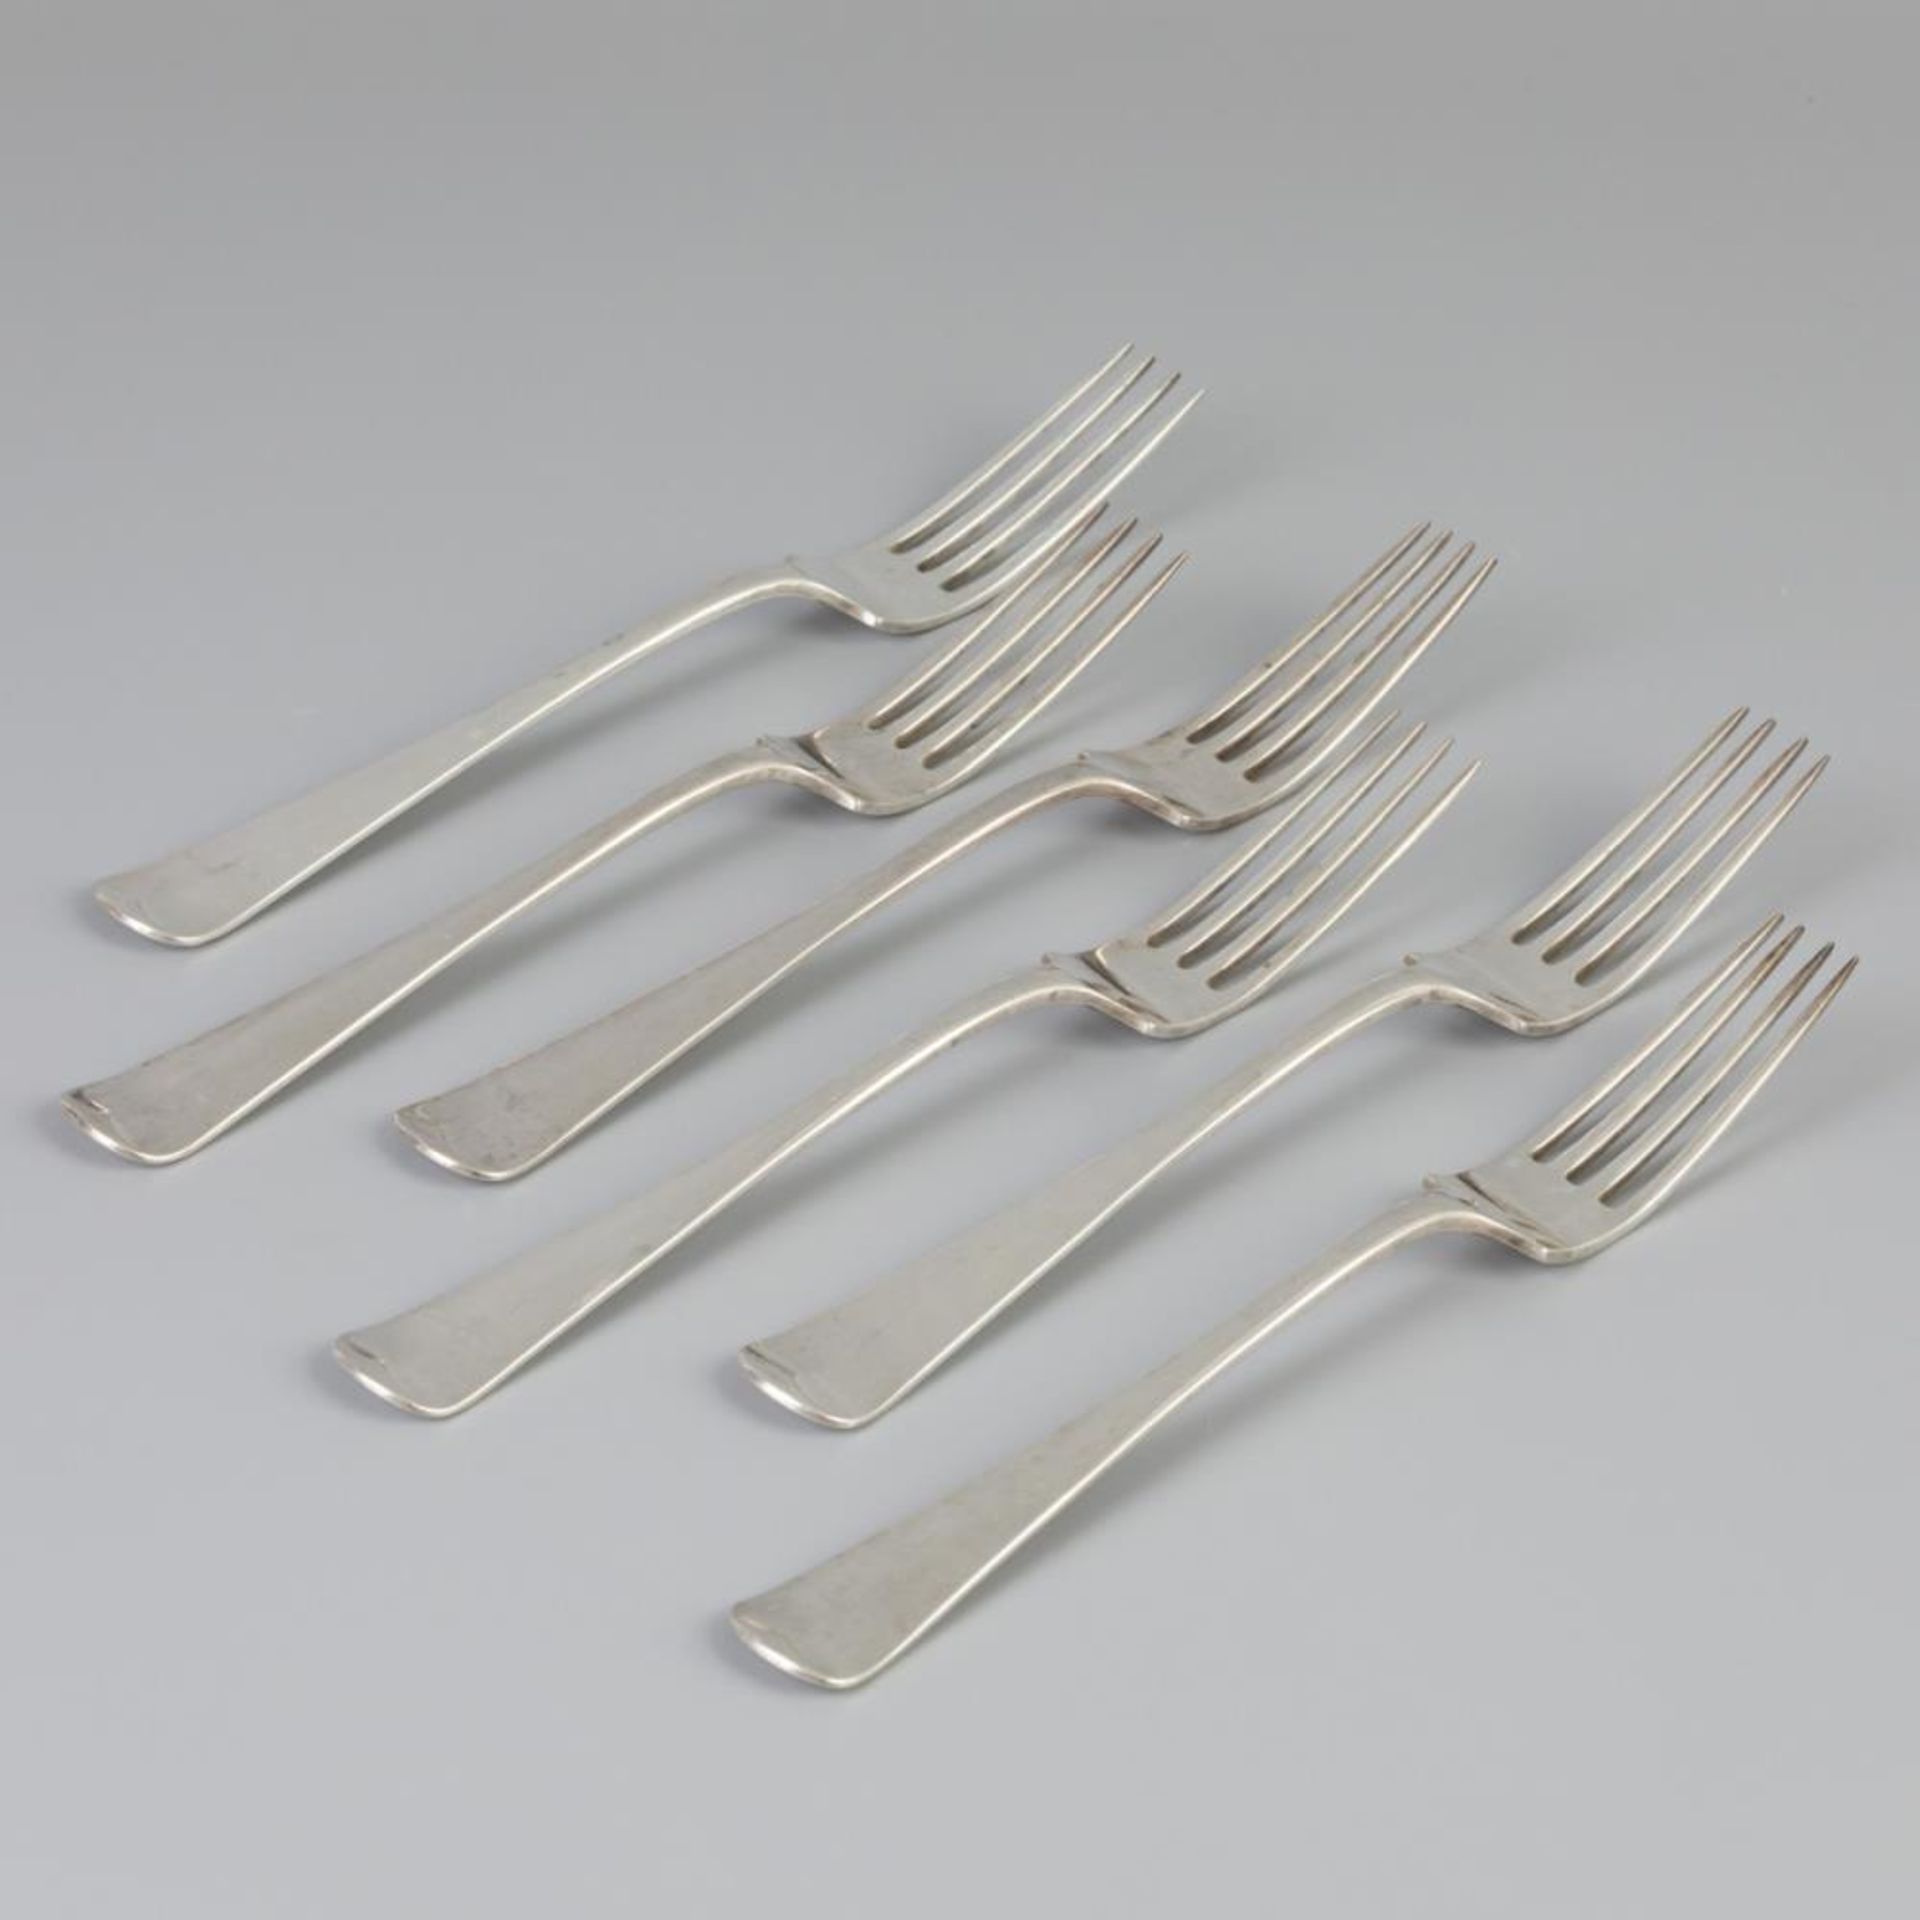 6 piece set dinner forks "Haags Lofje" silver.